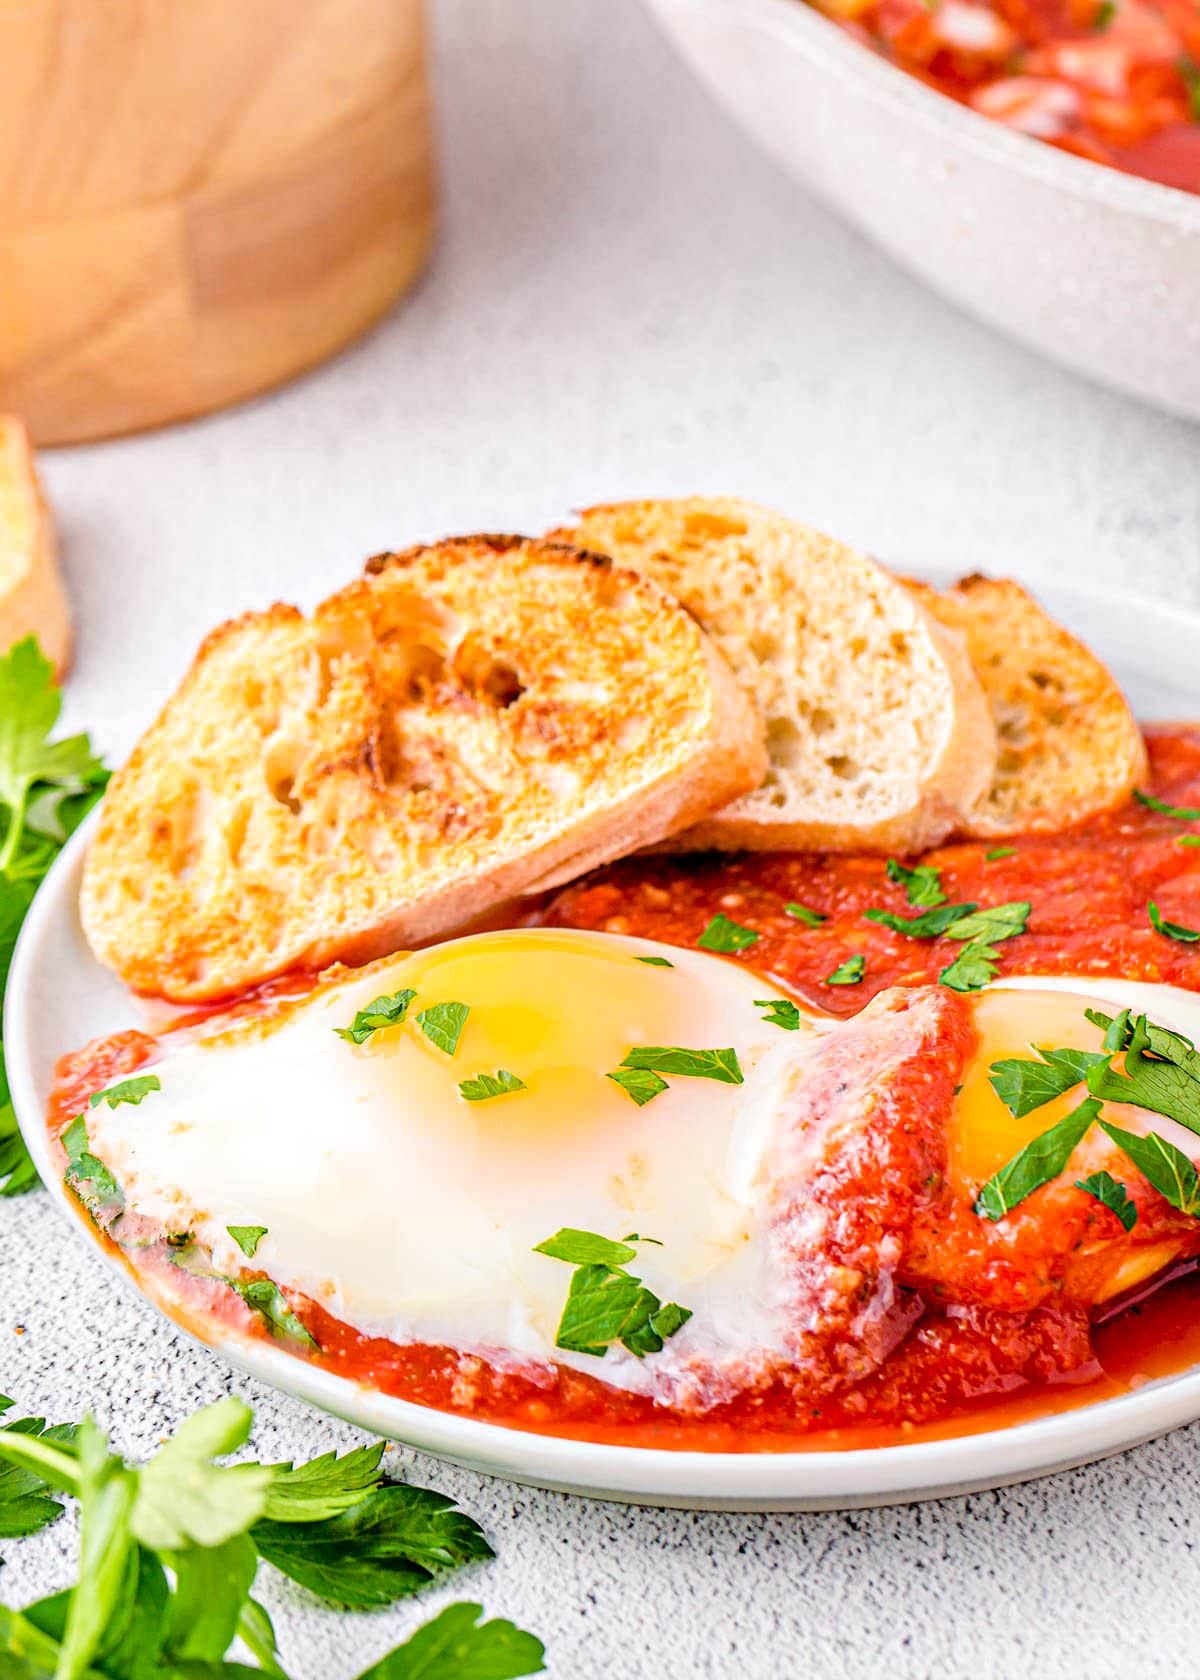 eggs in purgatory plated with extra sauce and nicely toasted crusty bread. The dish is topped with chopped parsley.